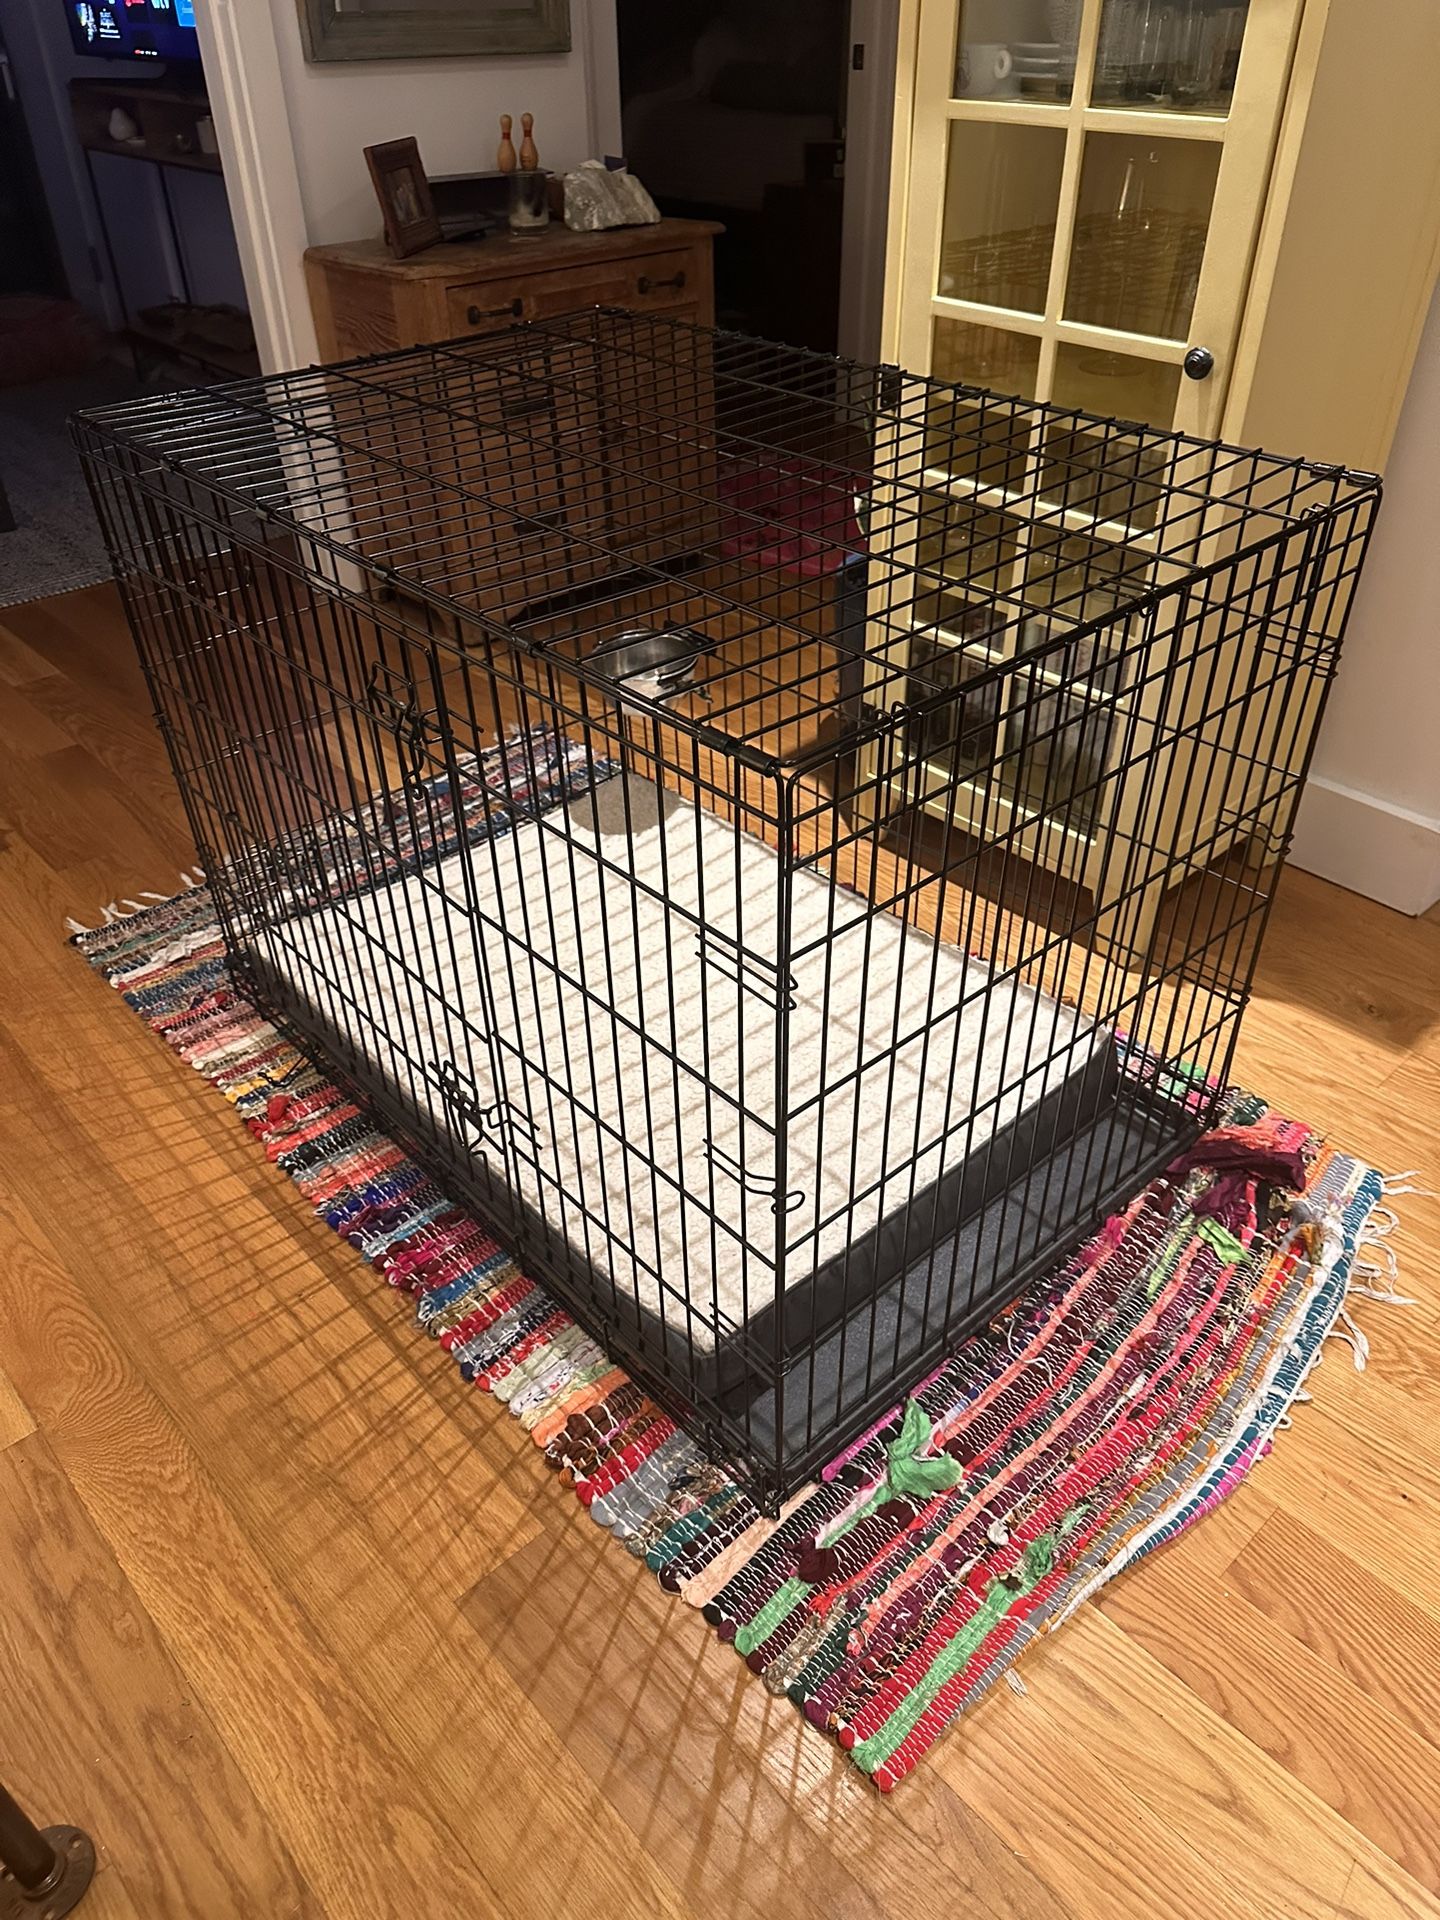 Large Double-door Dog Crate With Bed And Water Bowl